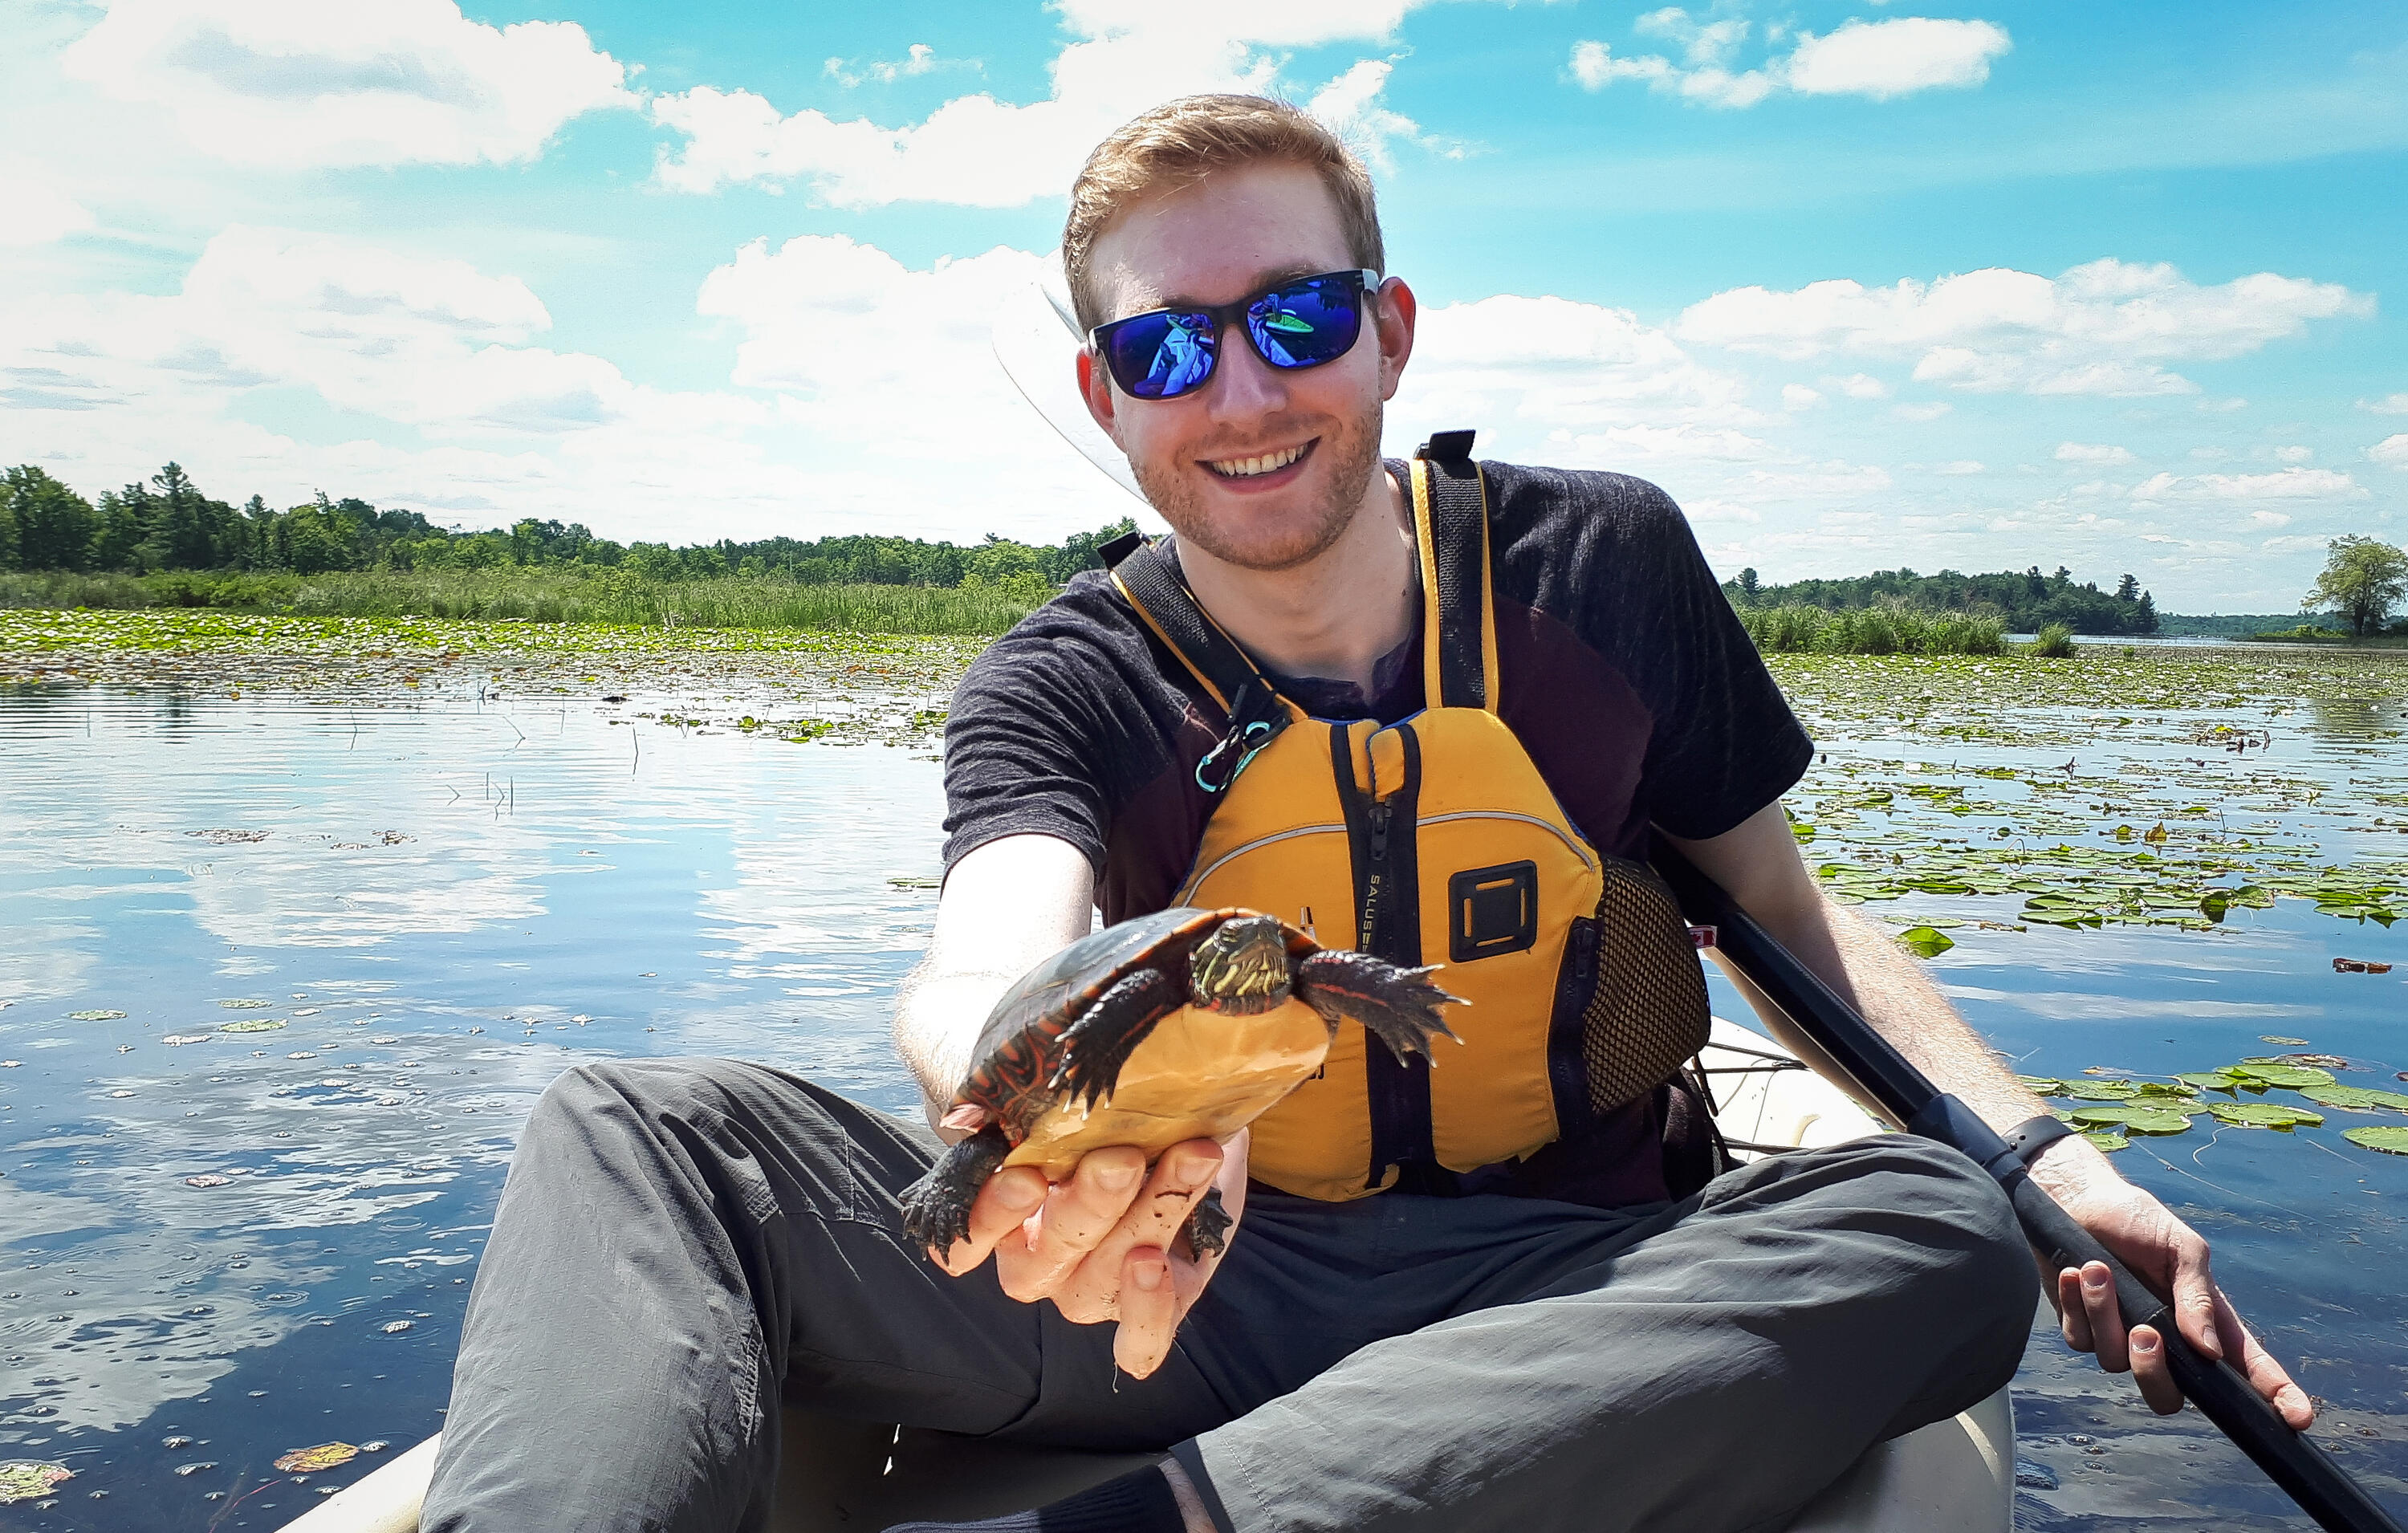 Andrew McDonald sitting in a kayak holding a turtle and smiling.